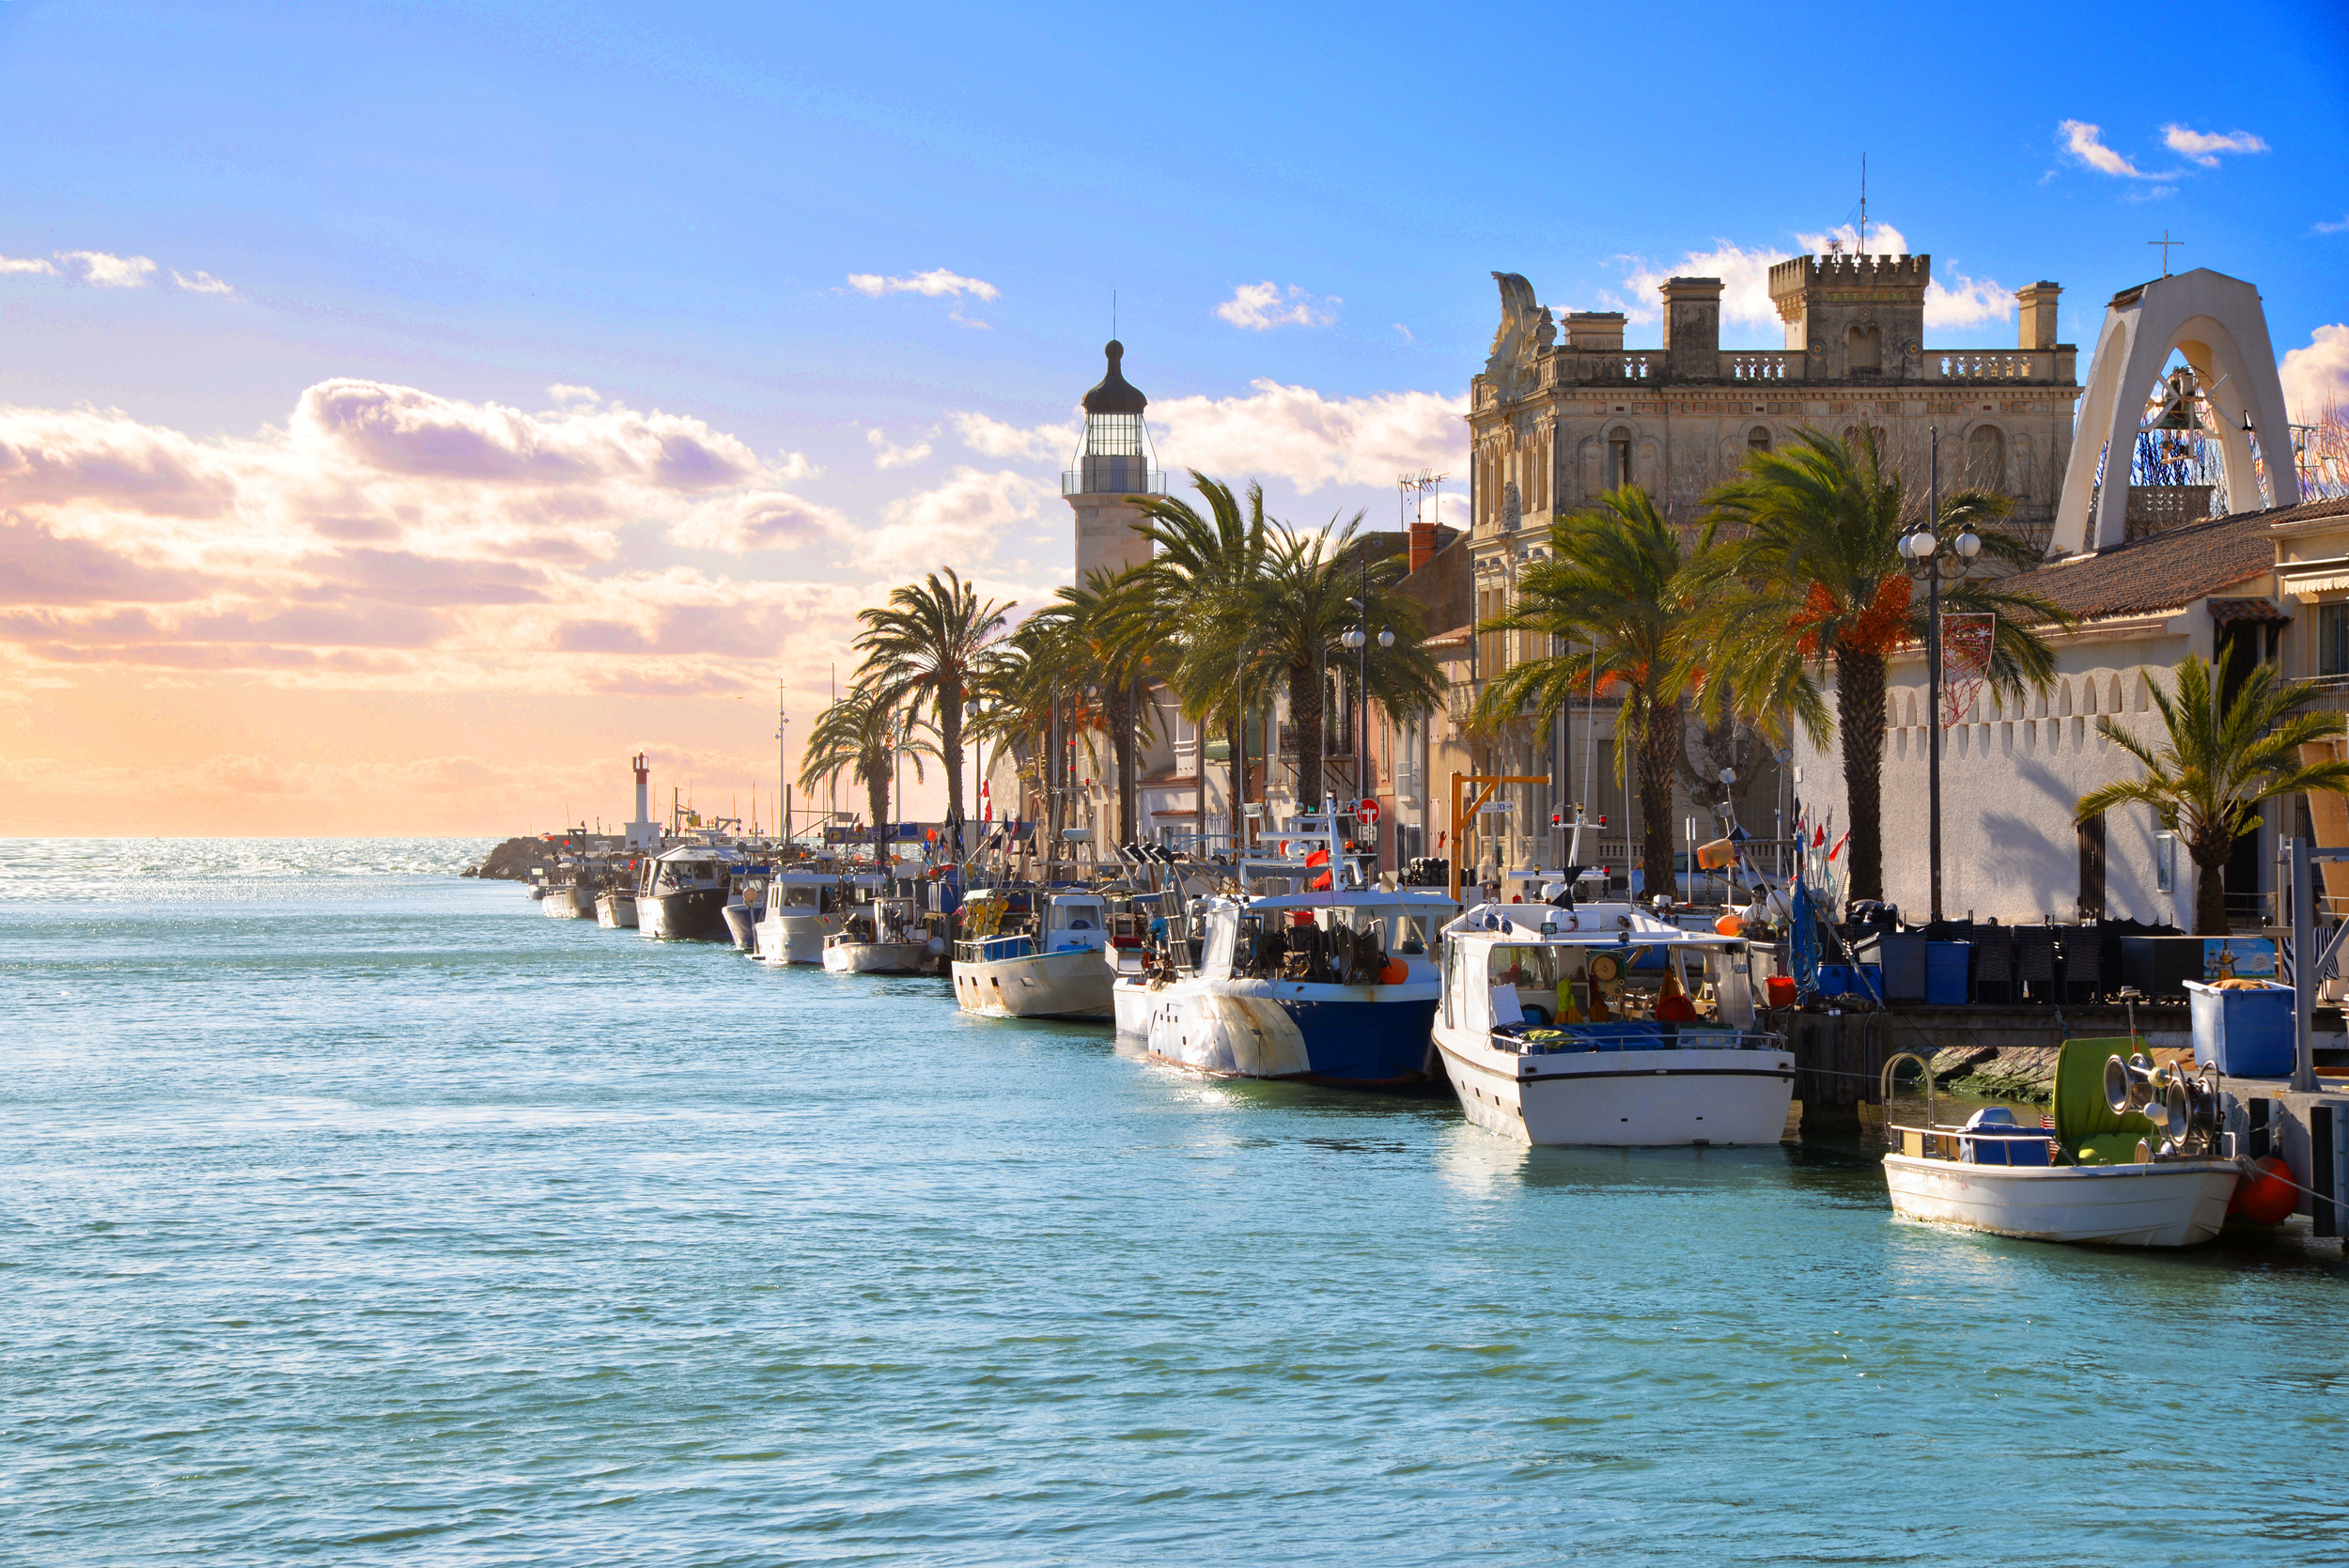 <p>A trip to Europe is a dream for many, but so is a nice relaxing vacation on the beach. Well, who says you have to choose? Look at the 20 amazing European beach destinations we’ve rounded up, and start planning your trip today!</p>